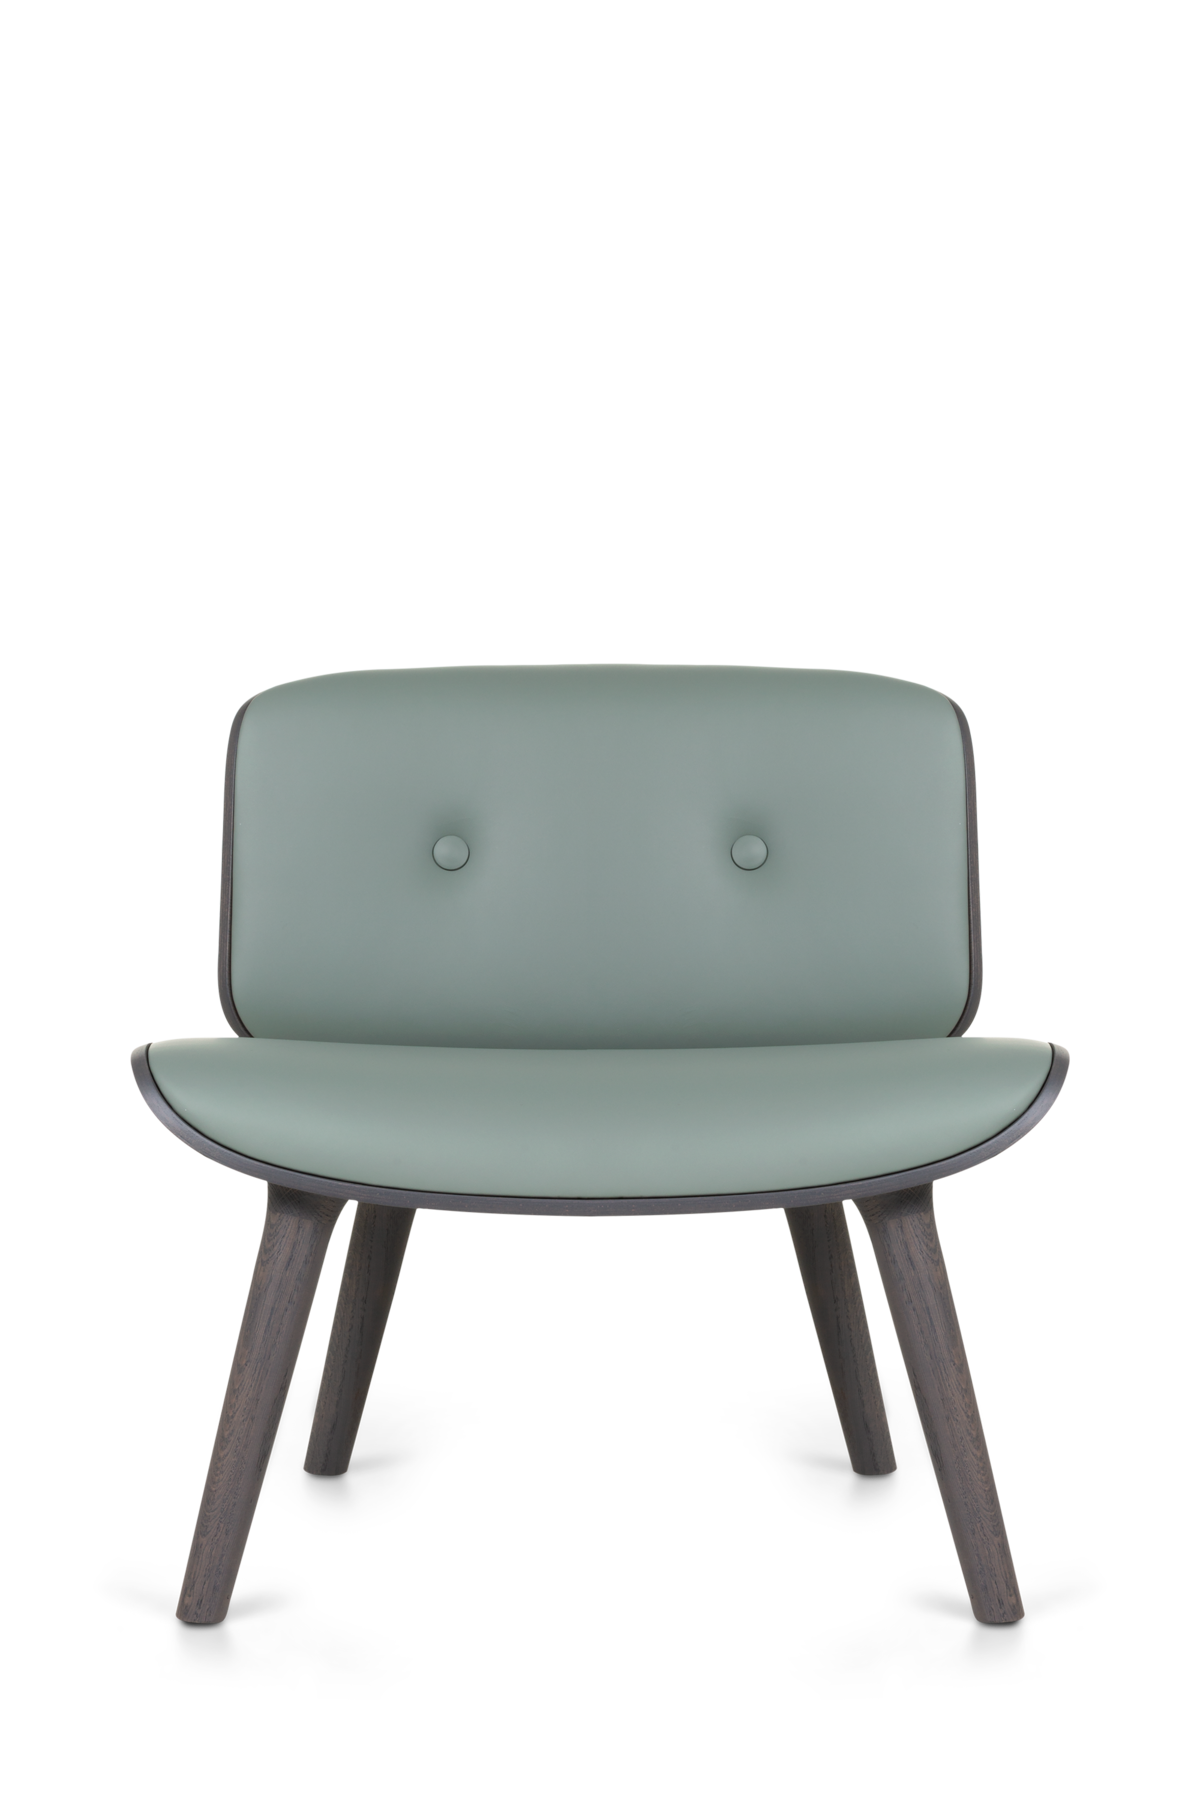 Nut Lounge Chair Spectrum agave grey front view